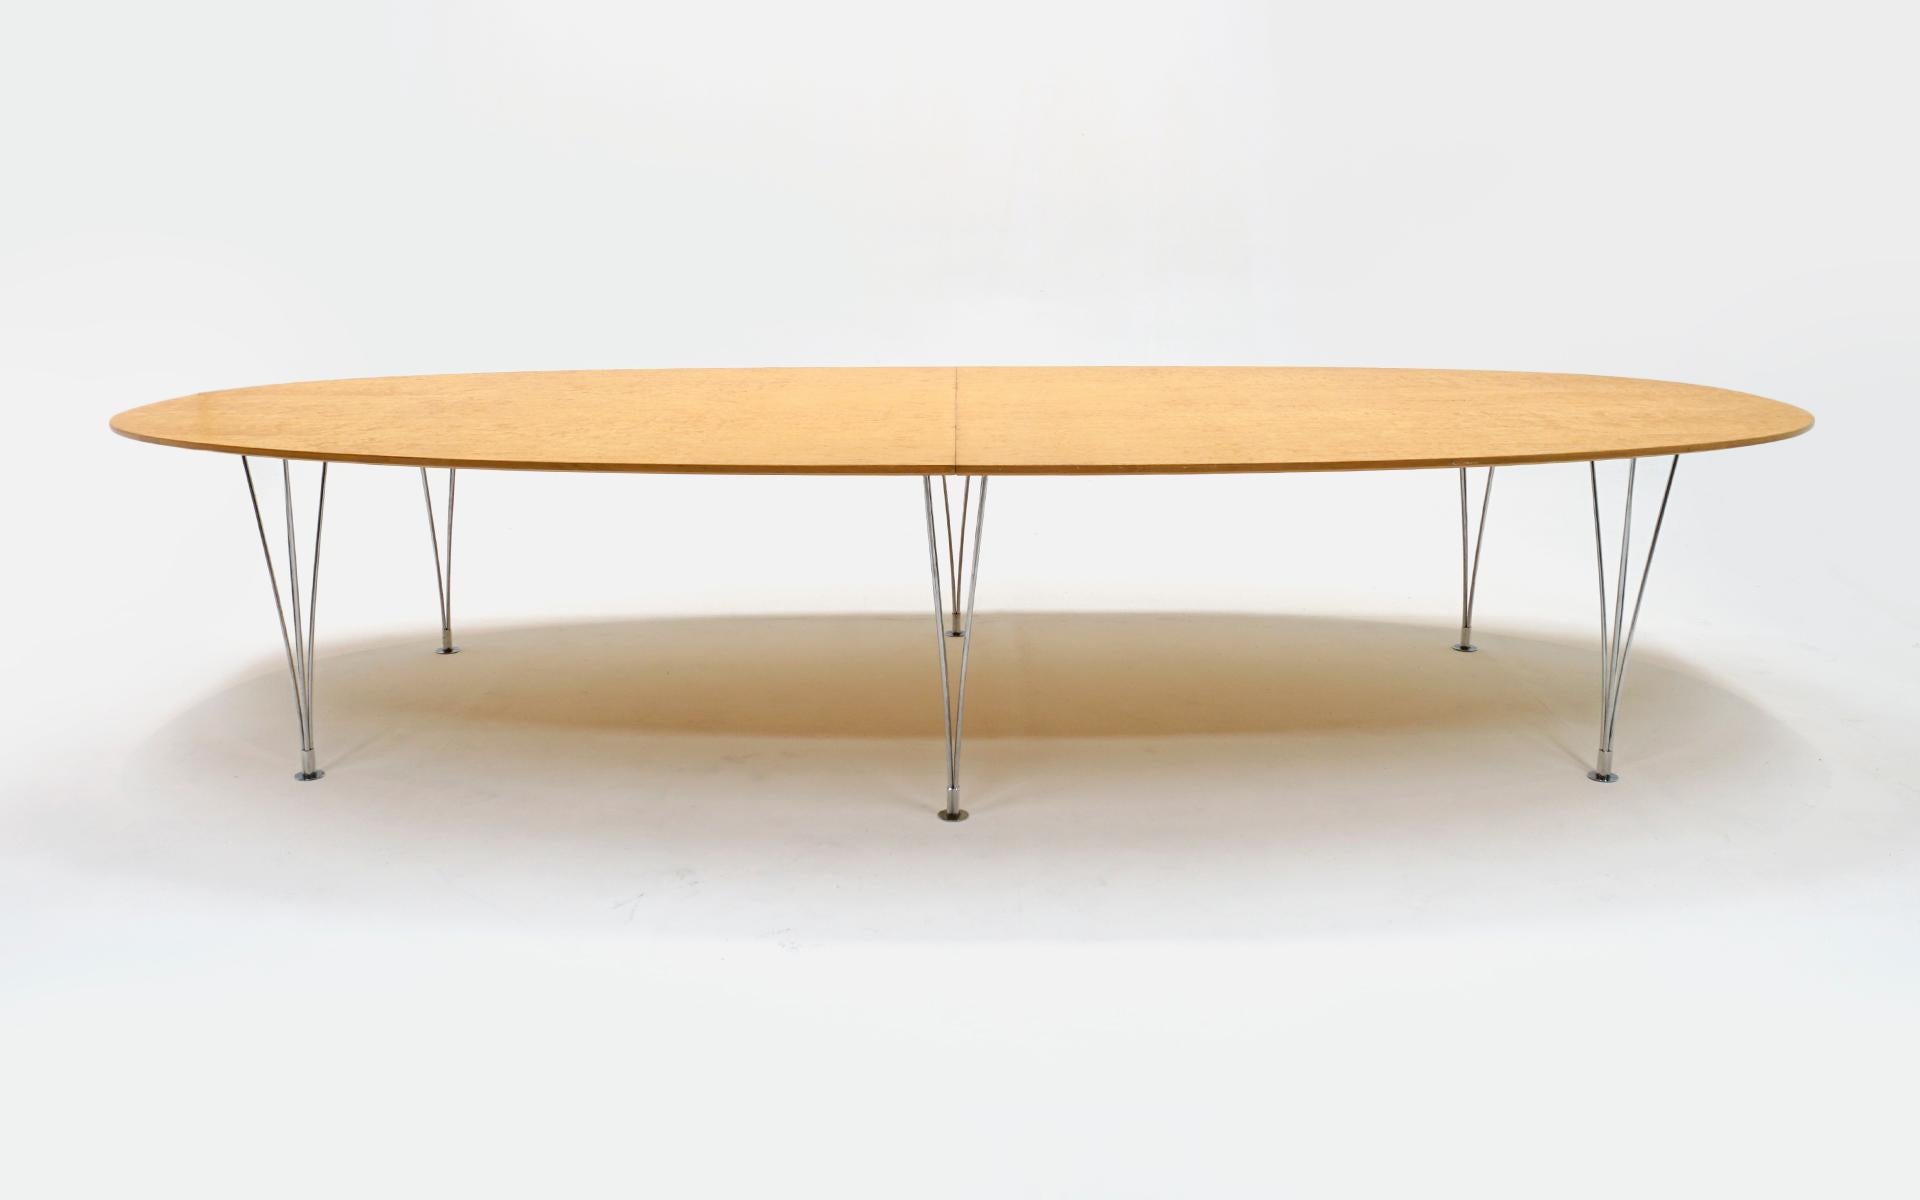 Super Ellipse dining / conference table in rare Karelian Birch Burl.designed by Arne Jacobsen, Piet Hein and Bruno Mathsson for Bruno Mathsson International, Sweden, 1986.  Almost twelve feet long and just over five feet deep.  Six chromed steel